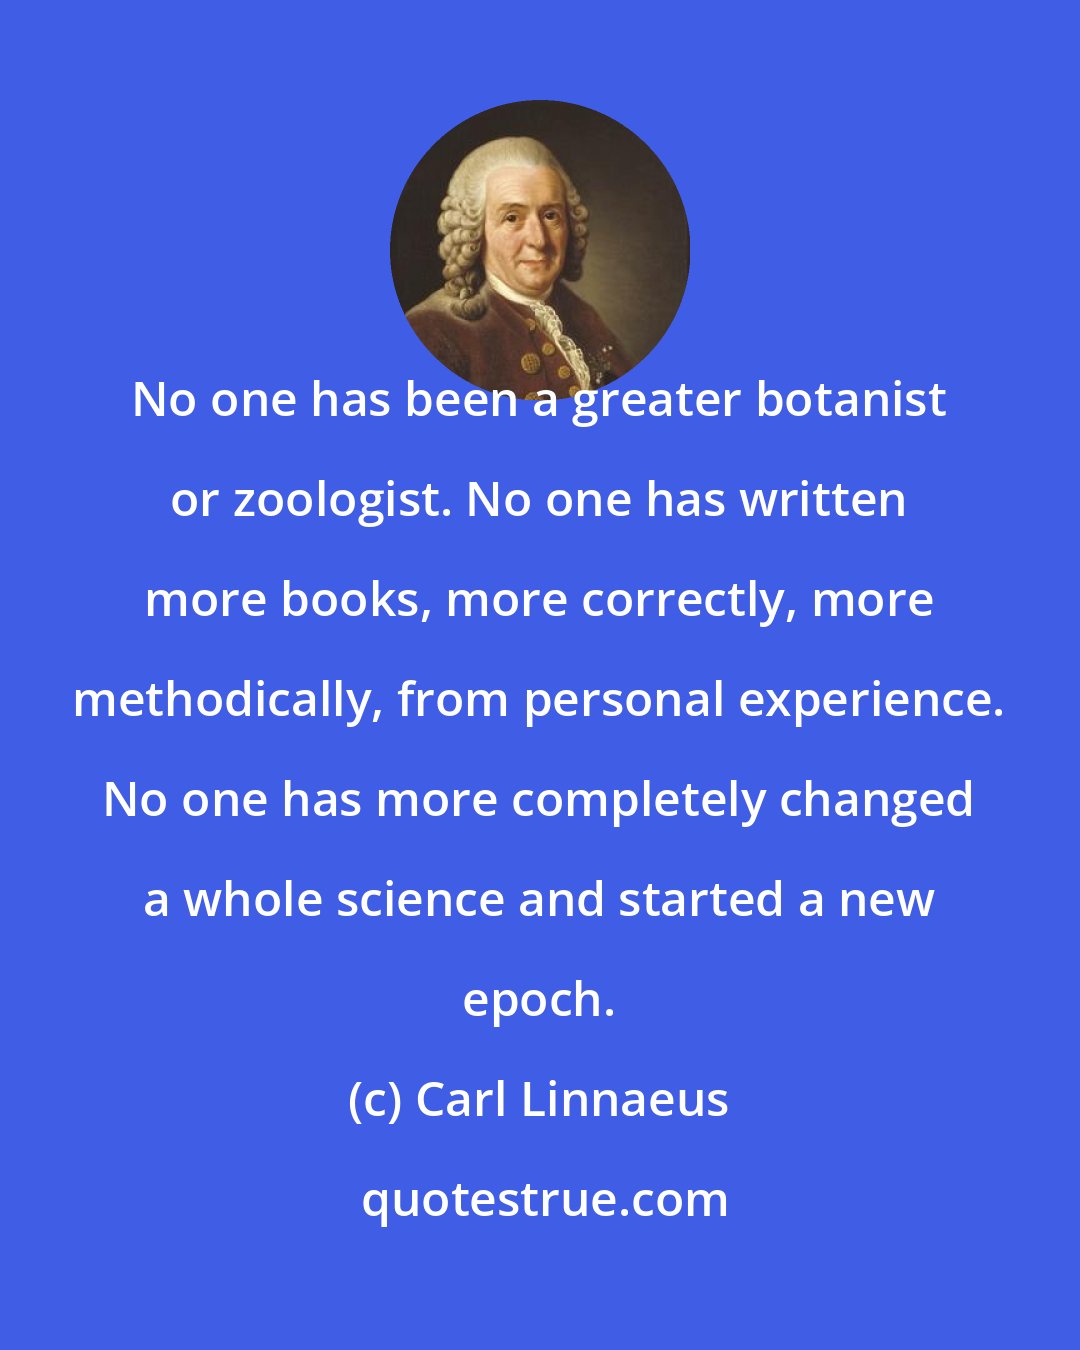 Carl Linnaeus: No one has been a greater botanist or zoologist. No one has written more books, more correctly, more methodically, from personal experience. No one has more completely changed a whole science and started a new epoch.